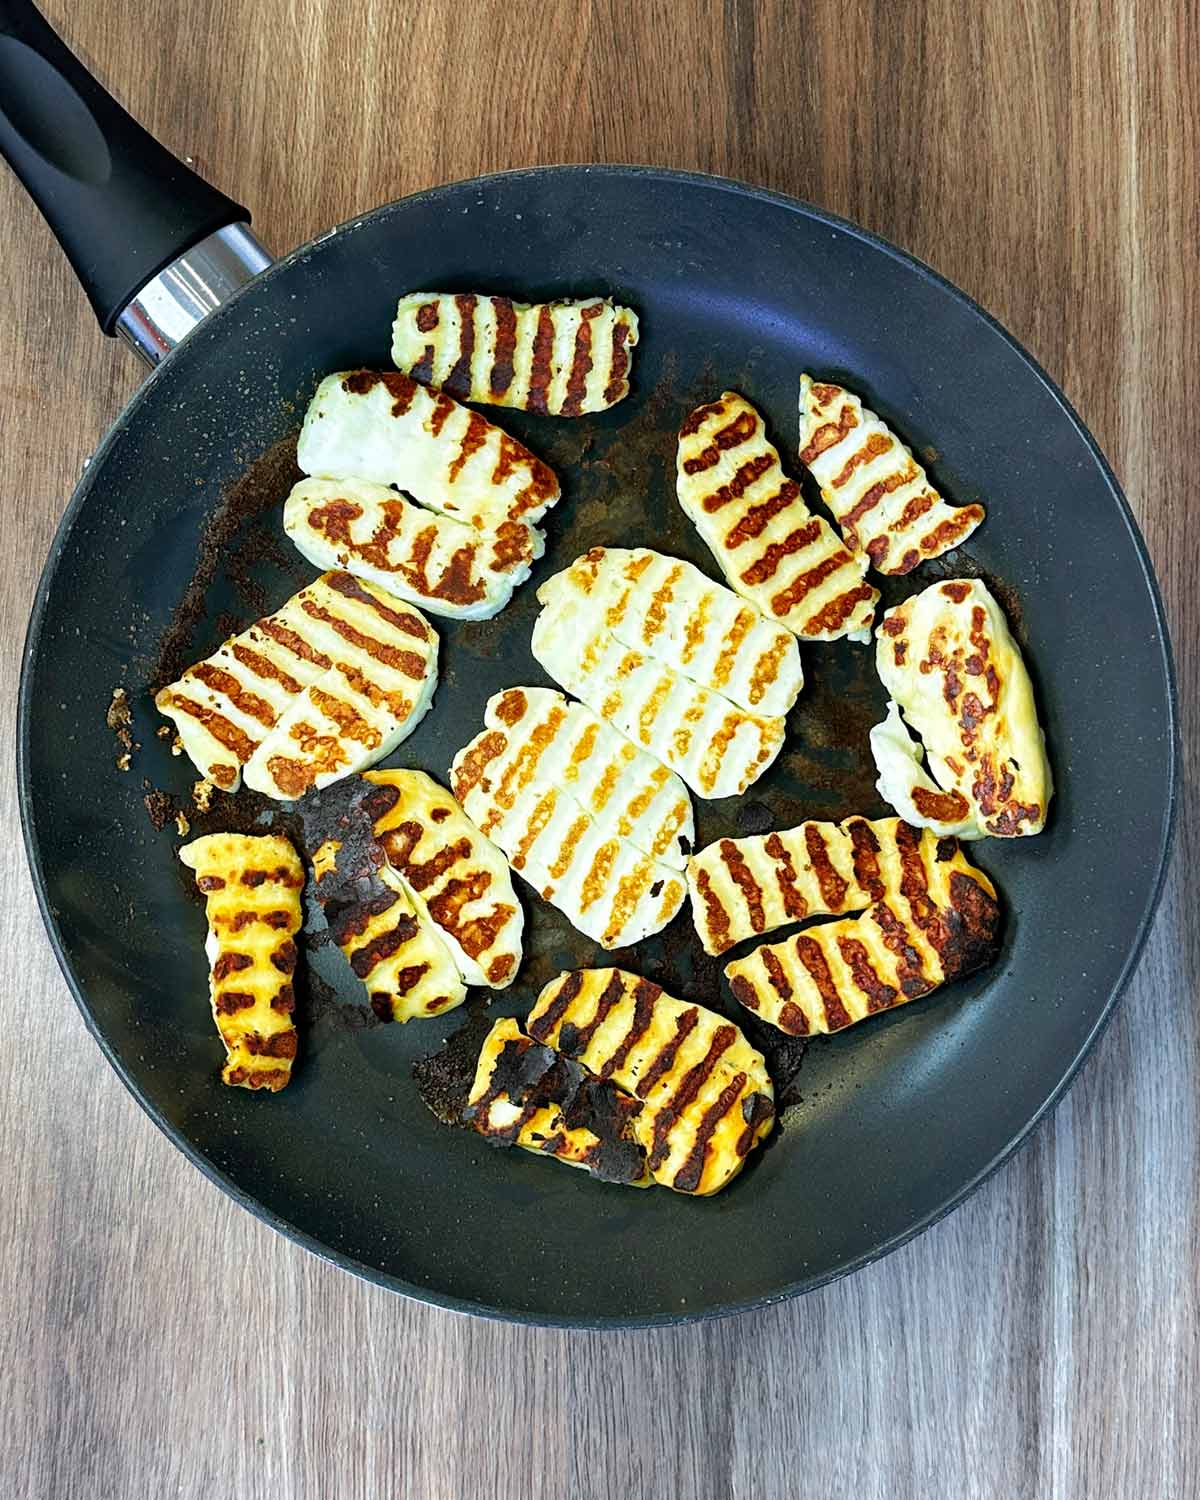 All the halloumi flipped over.